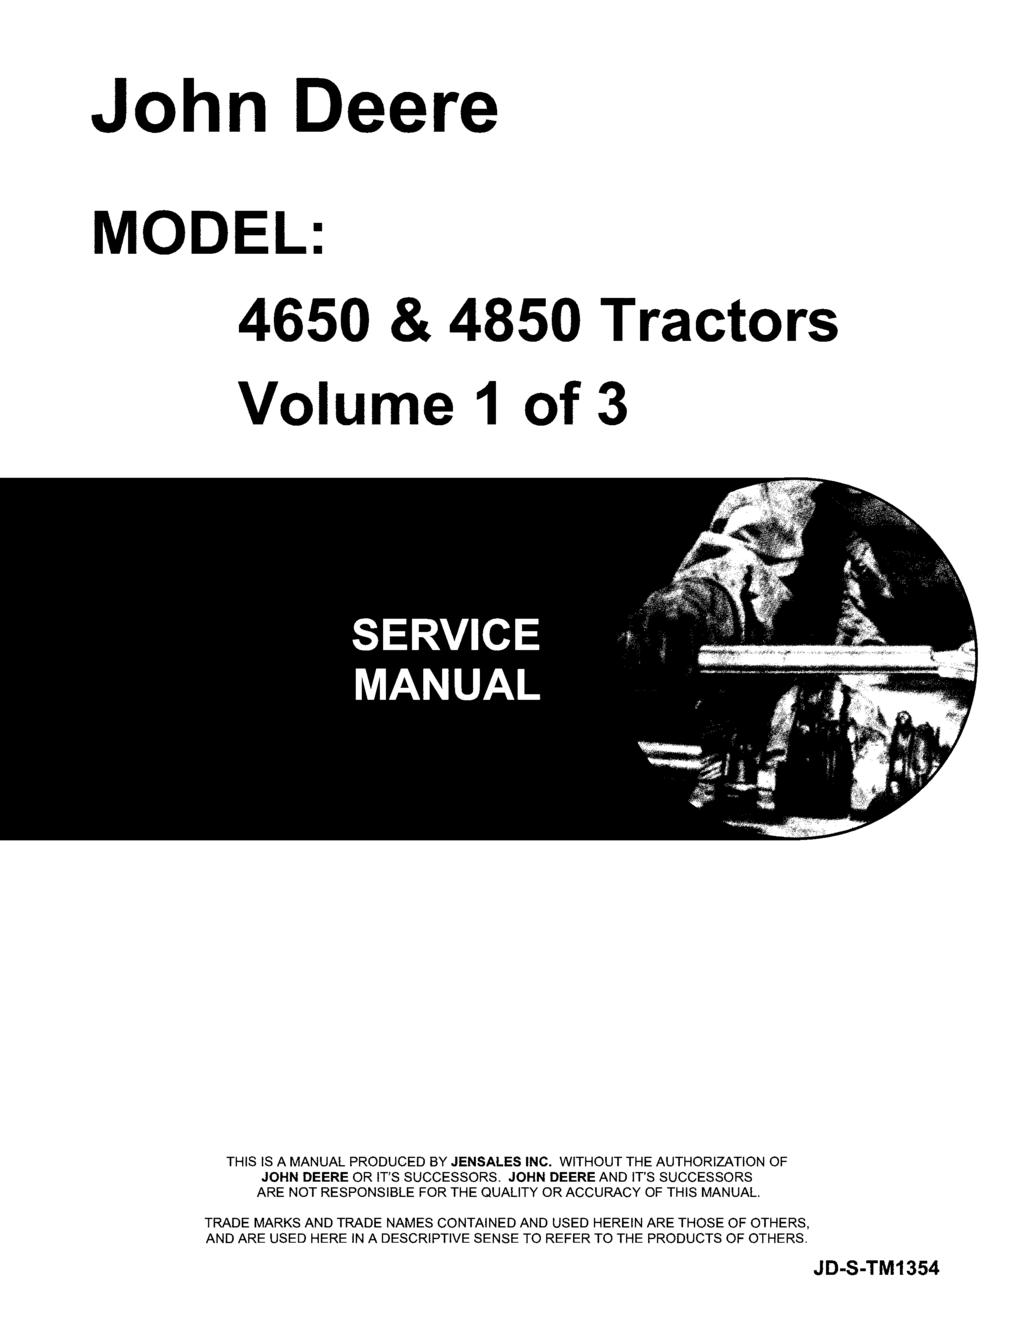 John Deere MODEL: 4650 & 4850 Tractors Volume 1 of 3 THIS IS A MANUAL PRODUCED BY JENSALES INC. WITHOUT THE AUTHORIZATION OF JOHN DEERE OR IT'S SUCCESSORS.